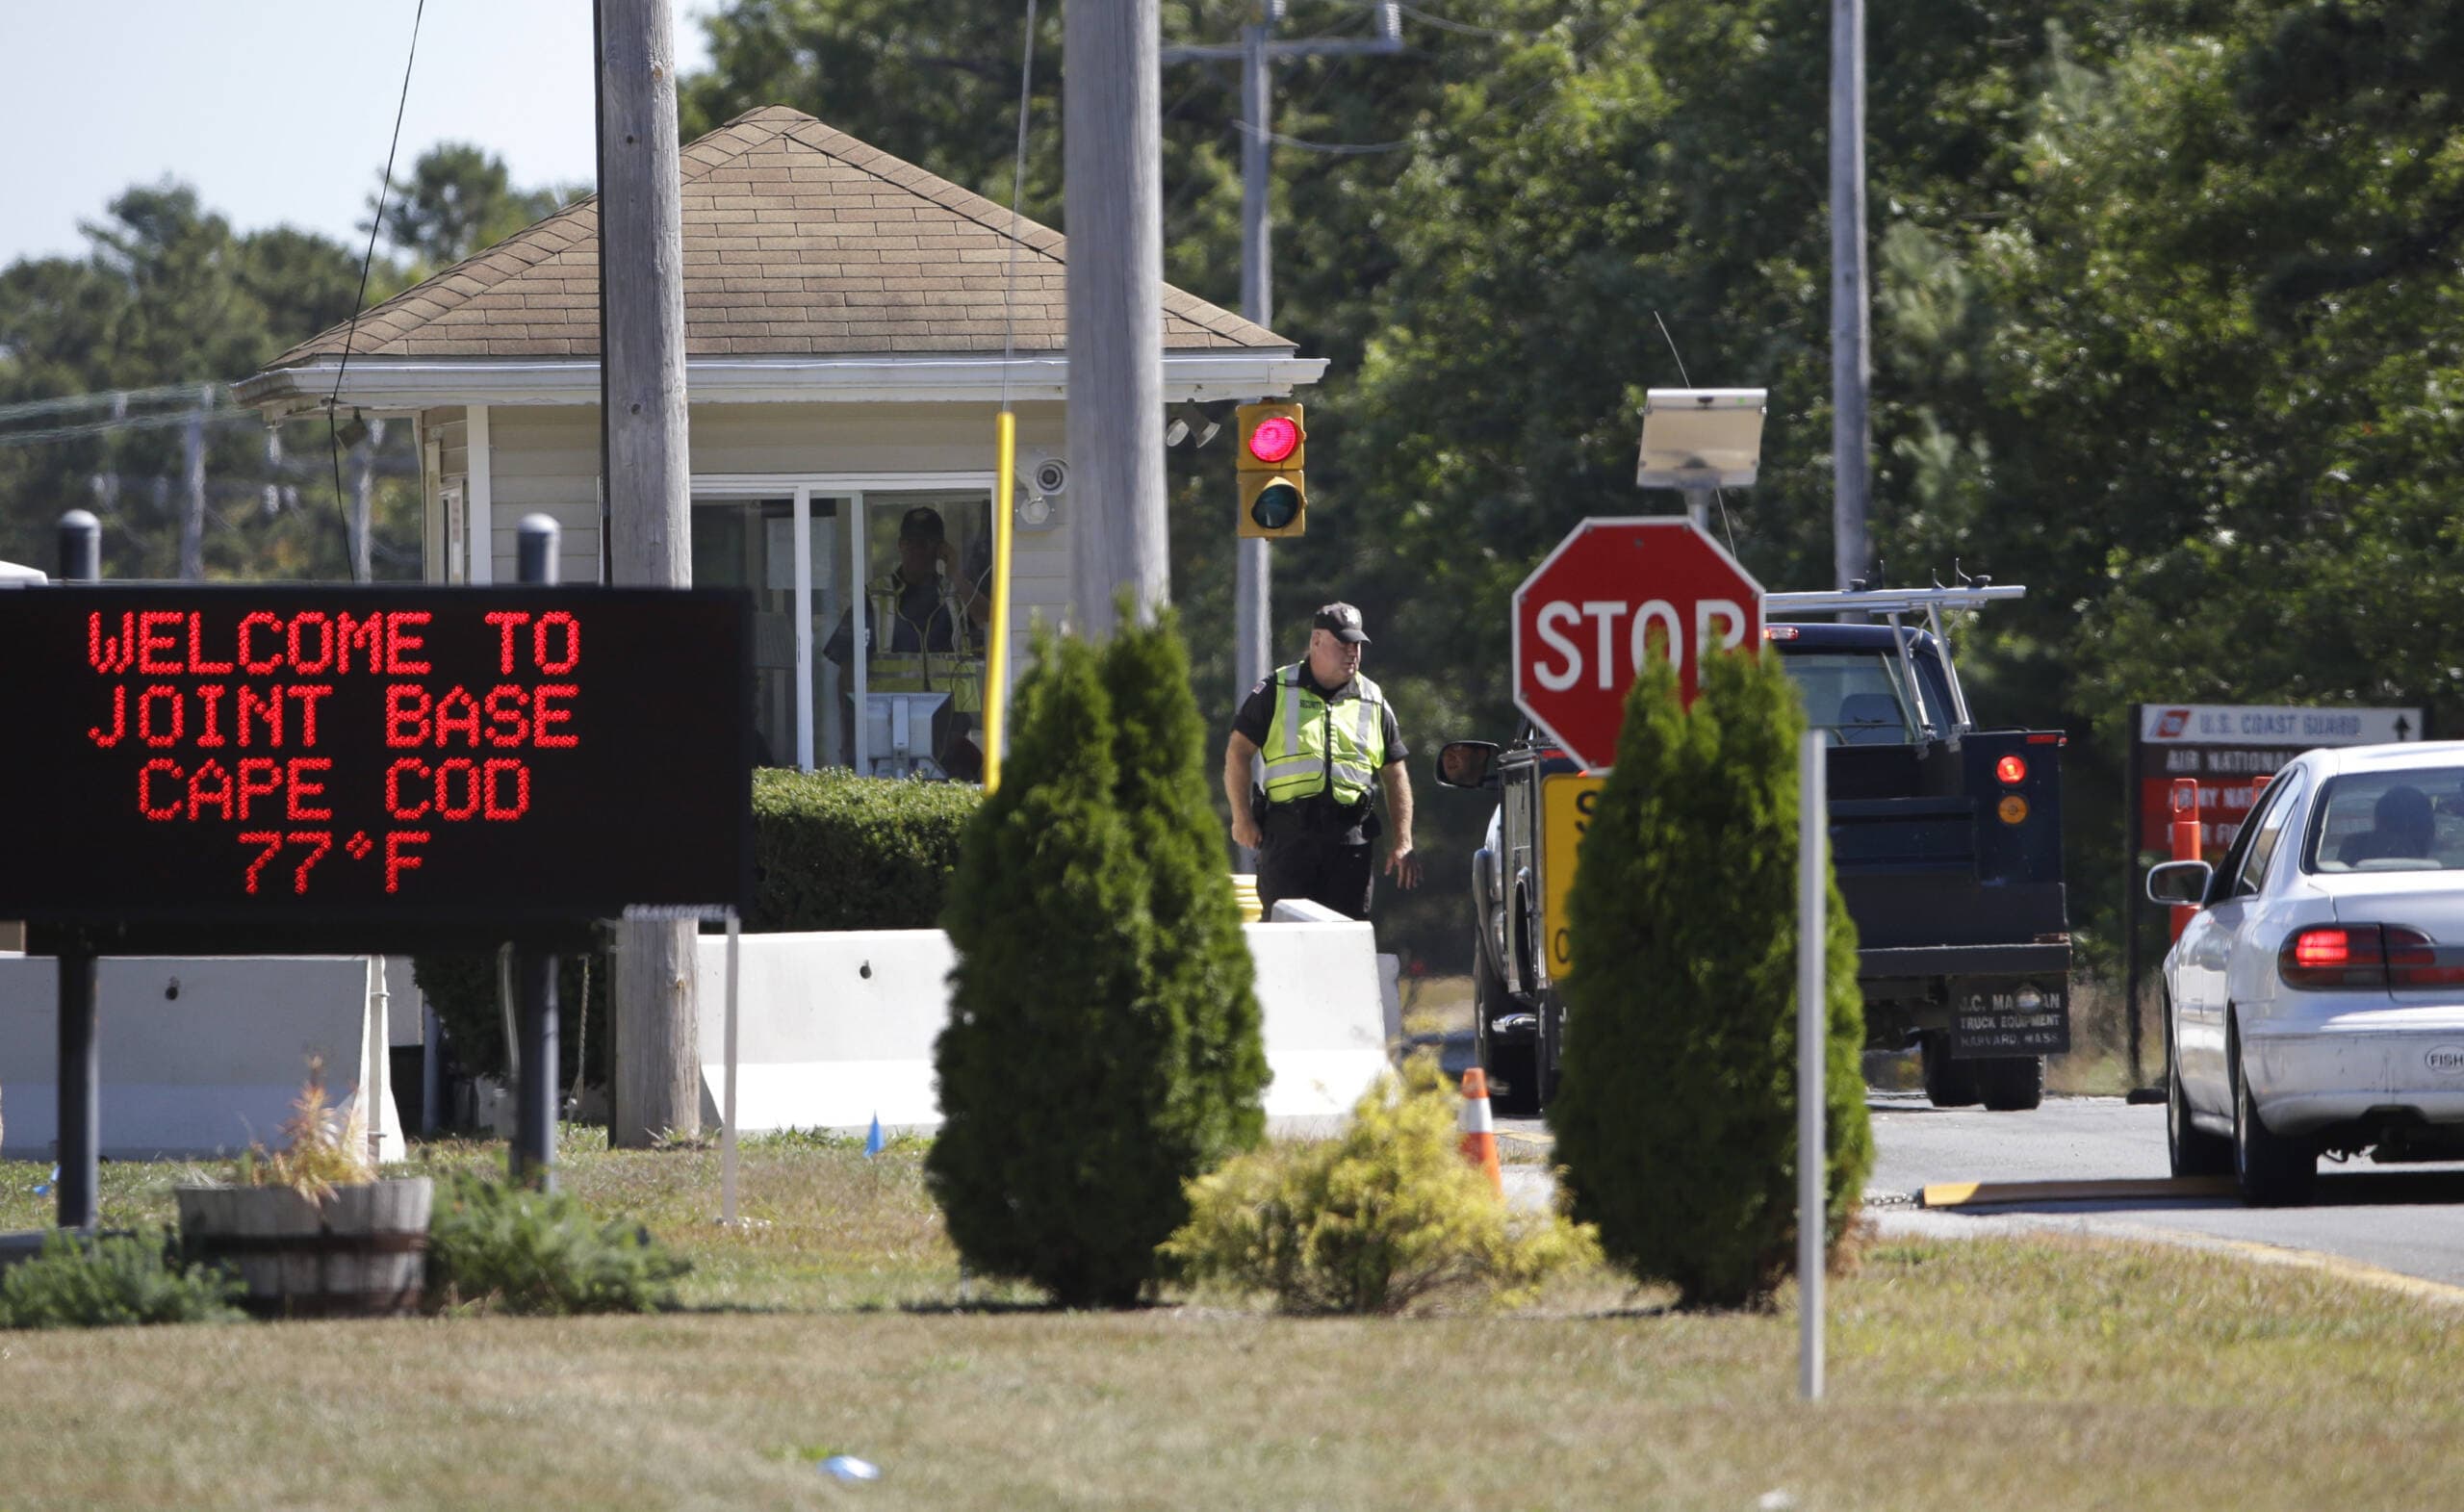 Vehicles are stopped by security personnel as they enter a gate at Joint Base Cape Cod in 2014. (Steven Senne/AP)